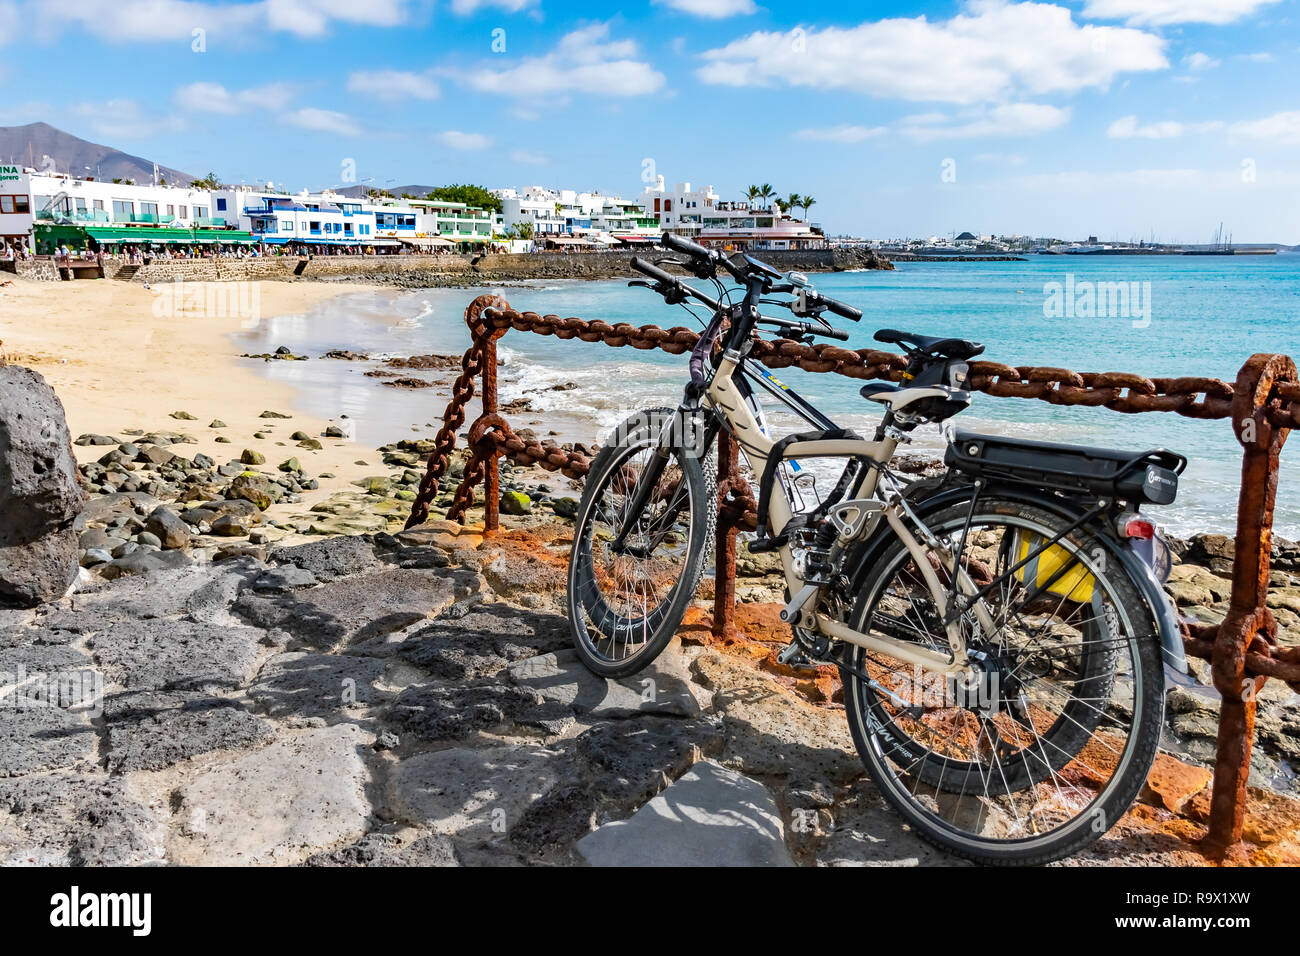 Bikes or Cycles at seaside promenade in Playa Blanca, the former fishermens village became a main touristic spot with opening of the new harbor, Lanza Stock Photo